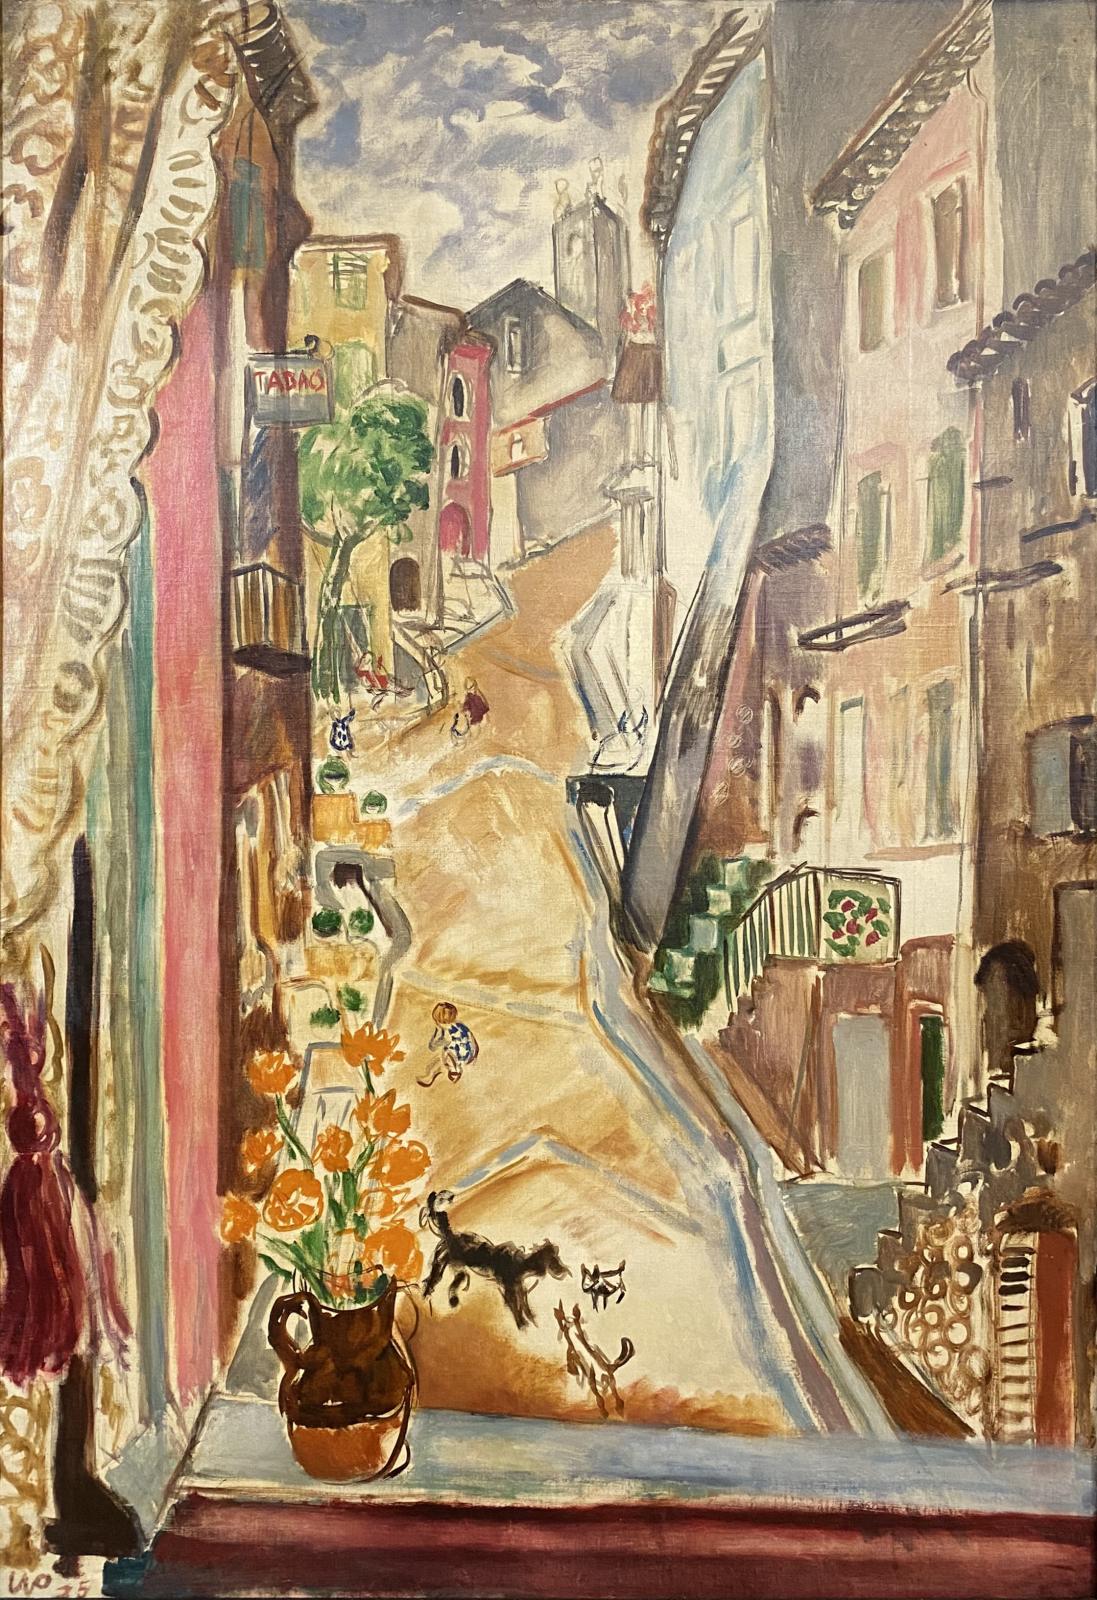 A painting of a crooked street in a Spanish village, seen through a window